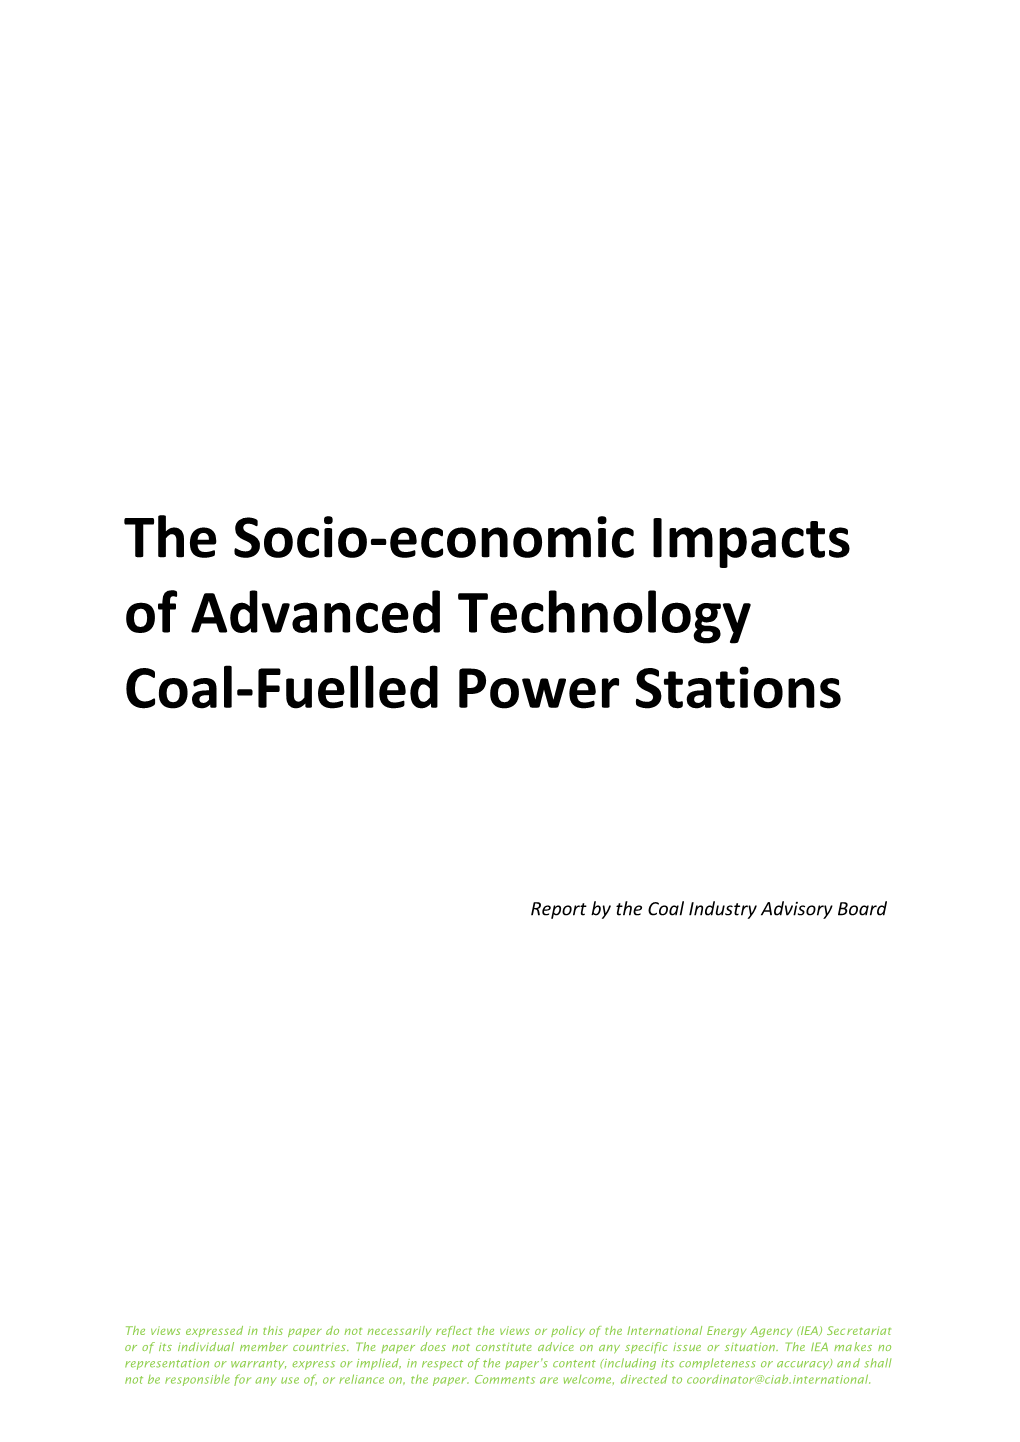 The Socio-Economic Impacts of Advanced Technology Coal-Fuelled Power Stations